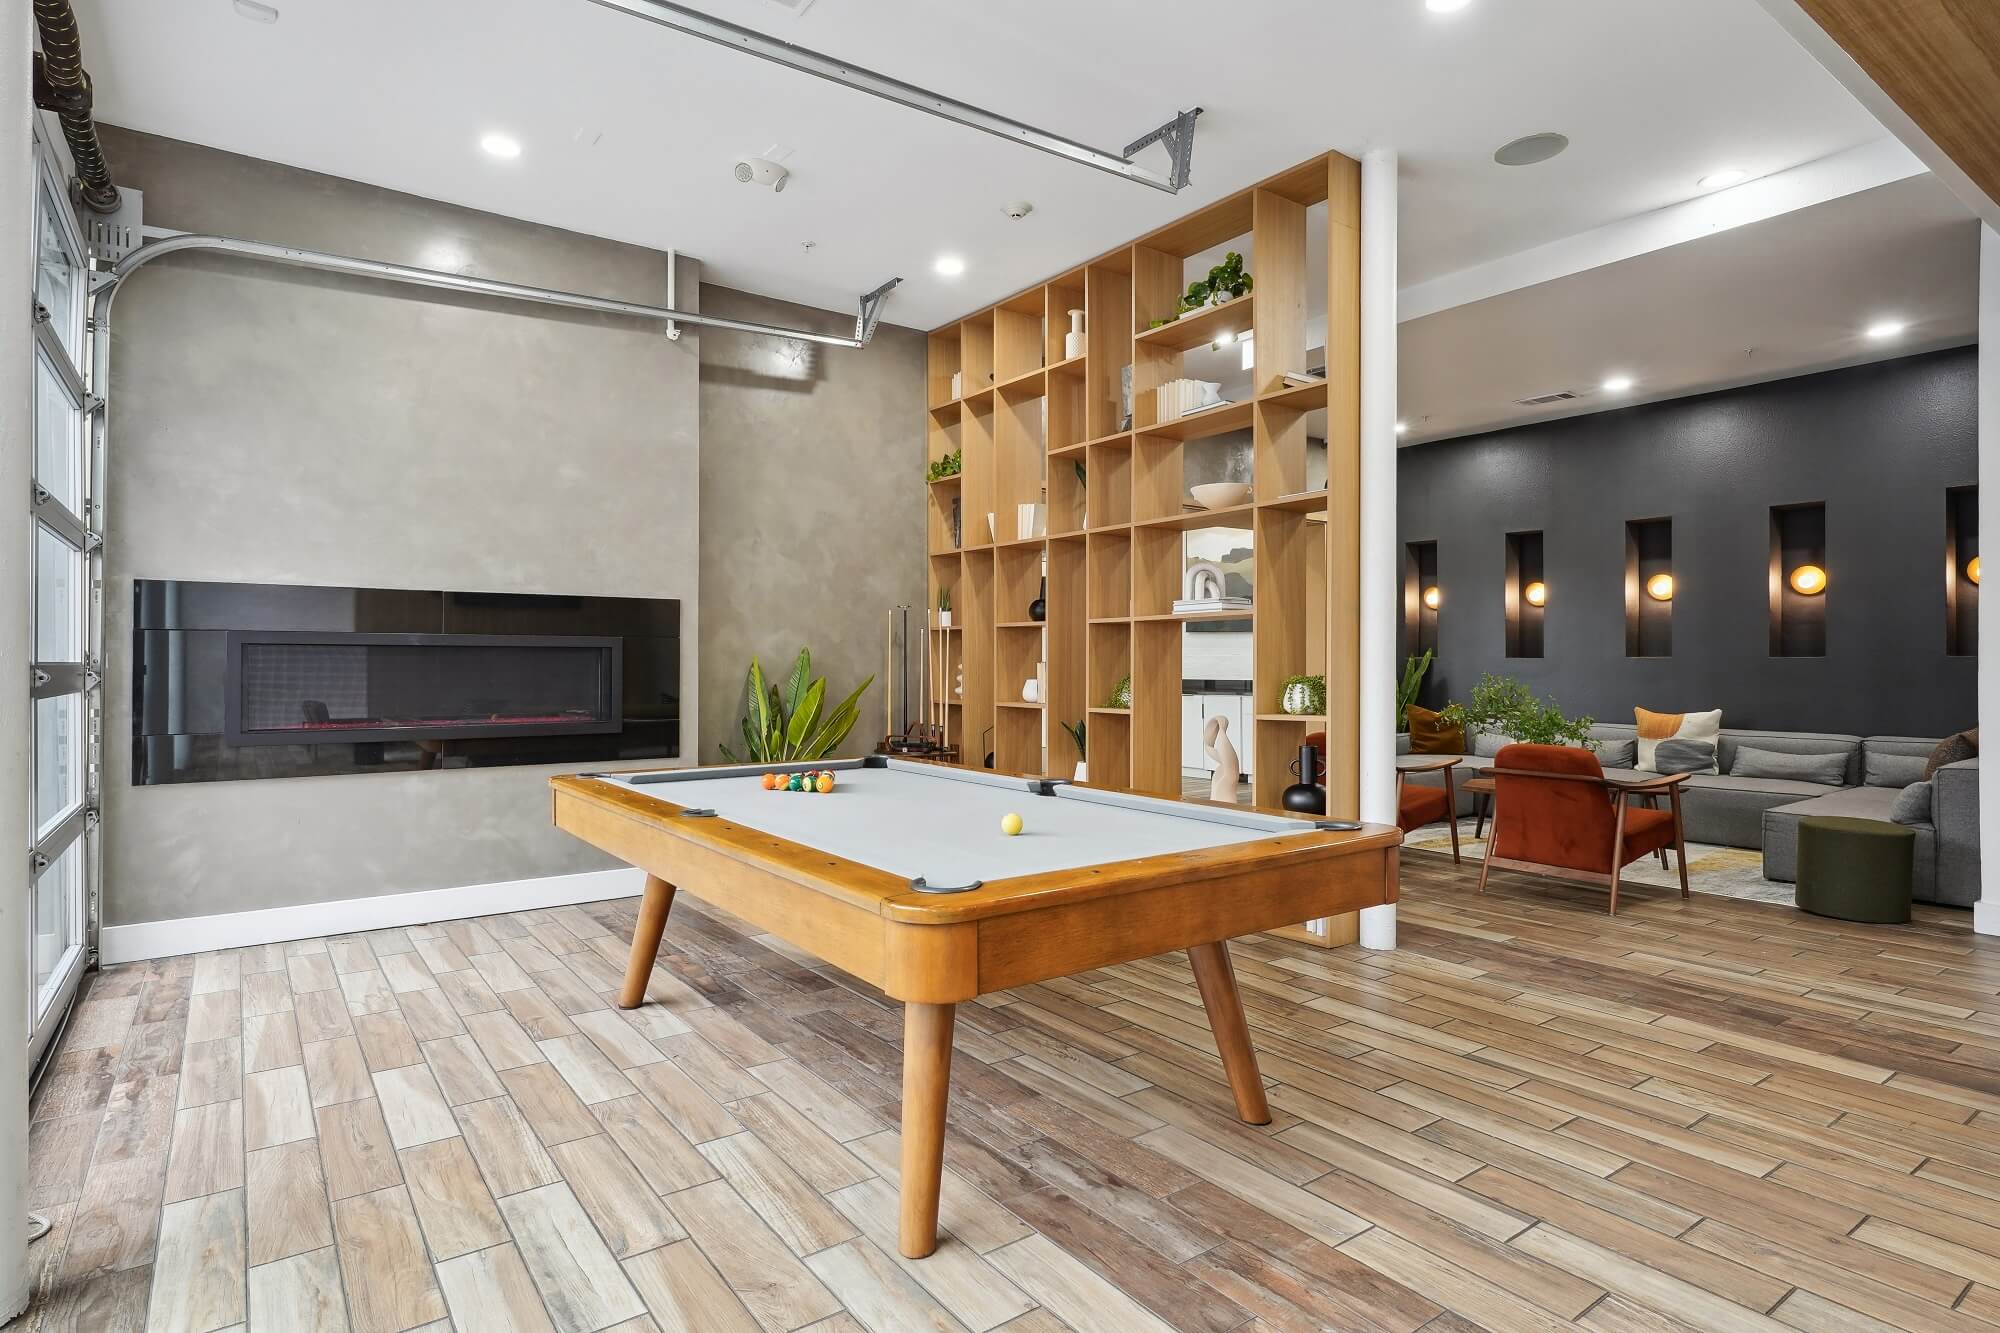 Clubhouse game room with billiards and fire place